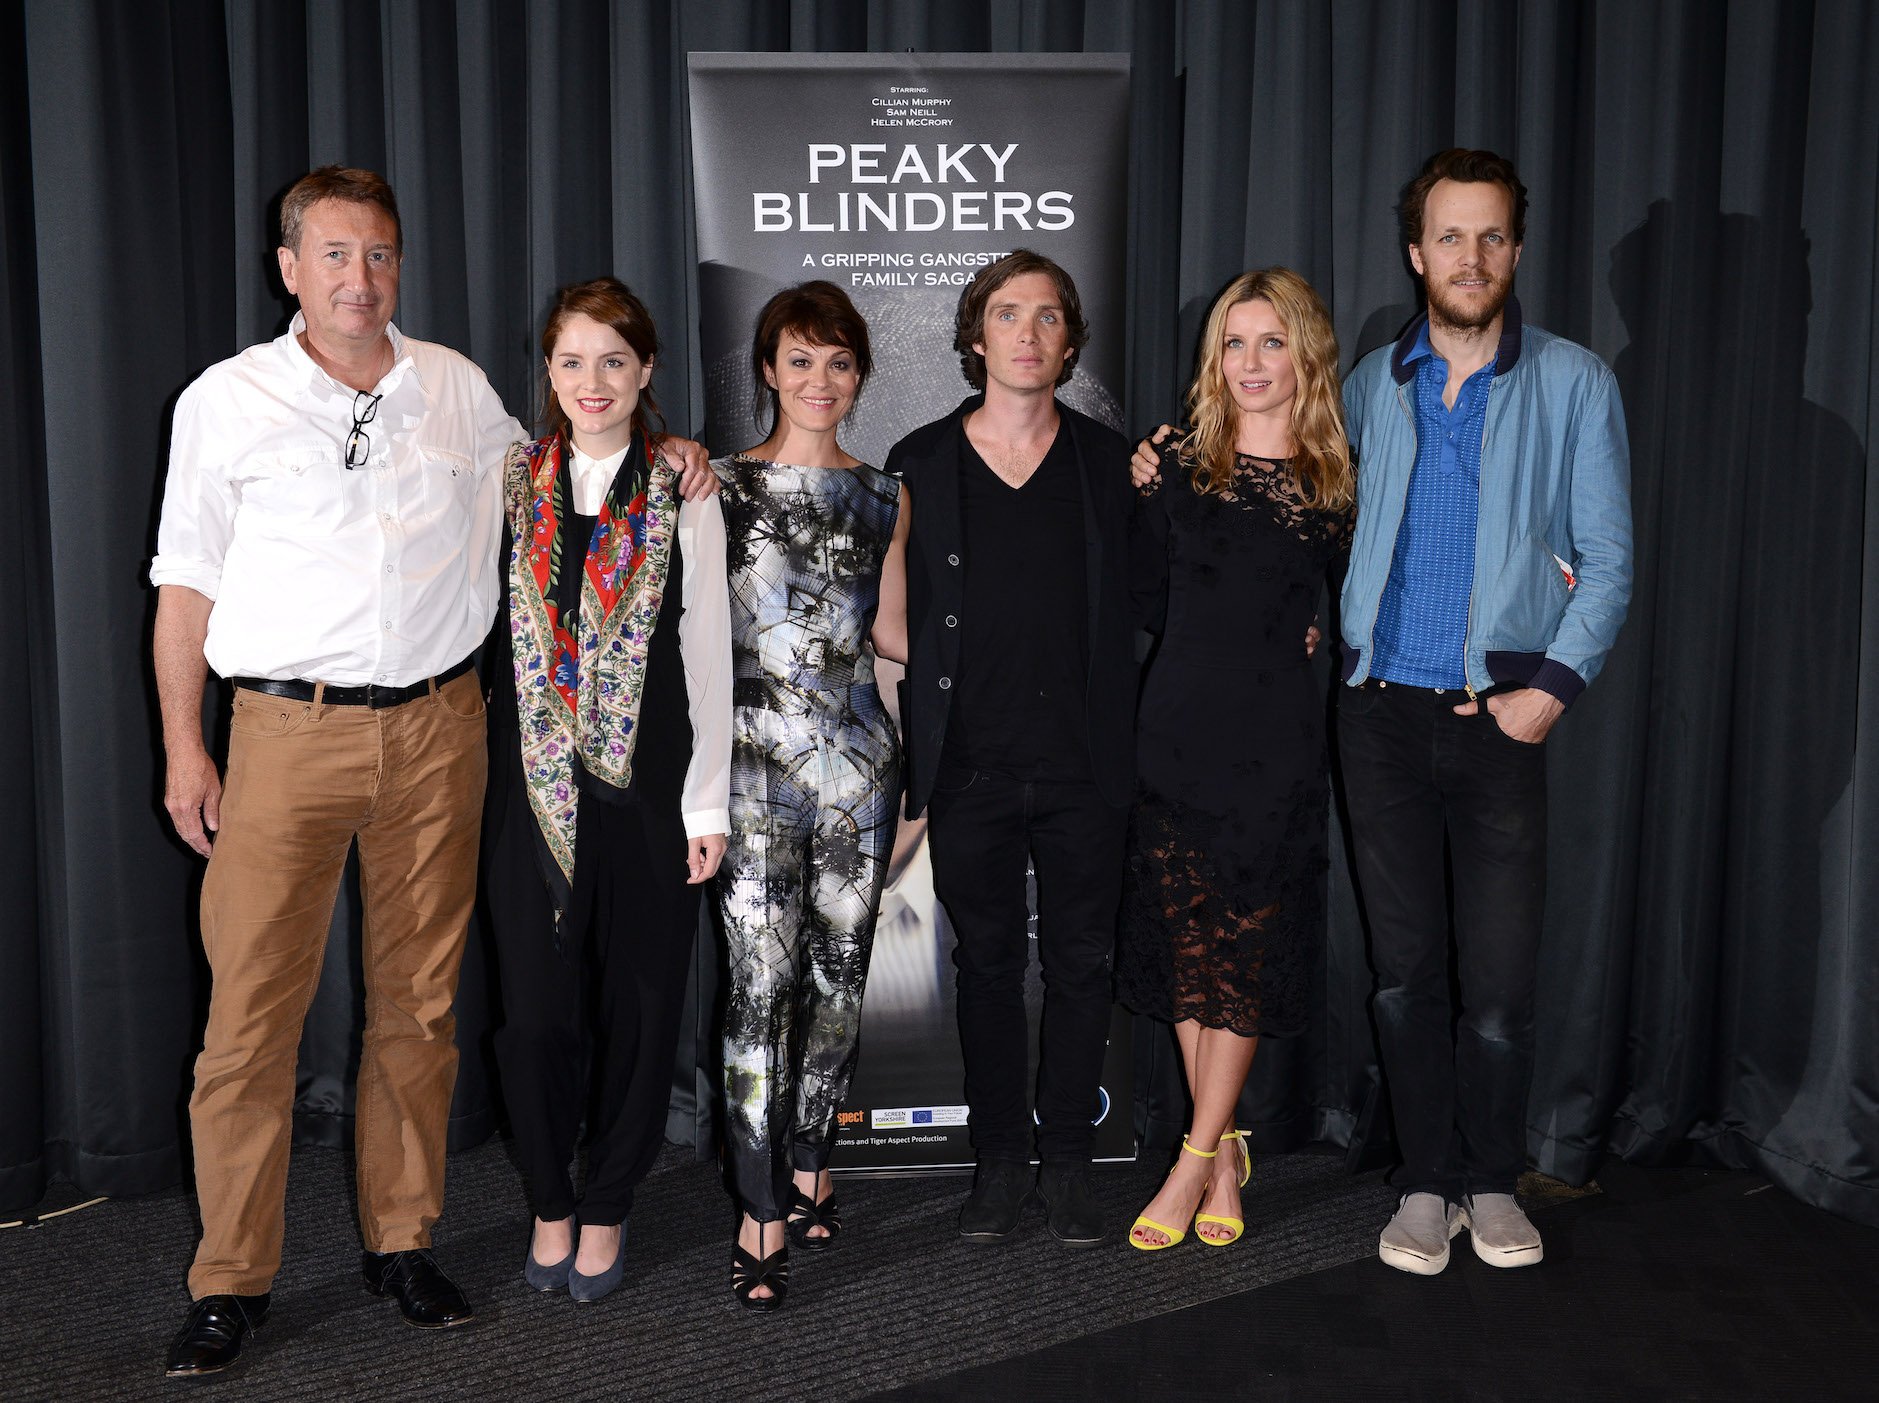 Steven Knight with some members of the 'Peaky Blinders' Season 6 cast, including Sophie Rundle, Helen McCrory, Cillian Murphy, Annabelle Wallis, and director Otto Bathurst. They're standing with their arms around each other in front of a 'Peaky Blinders' poster